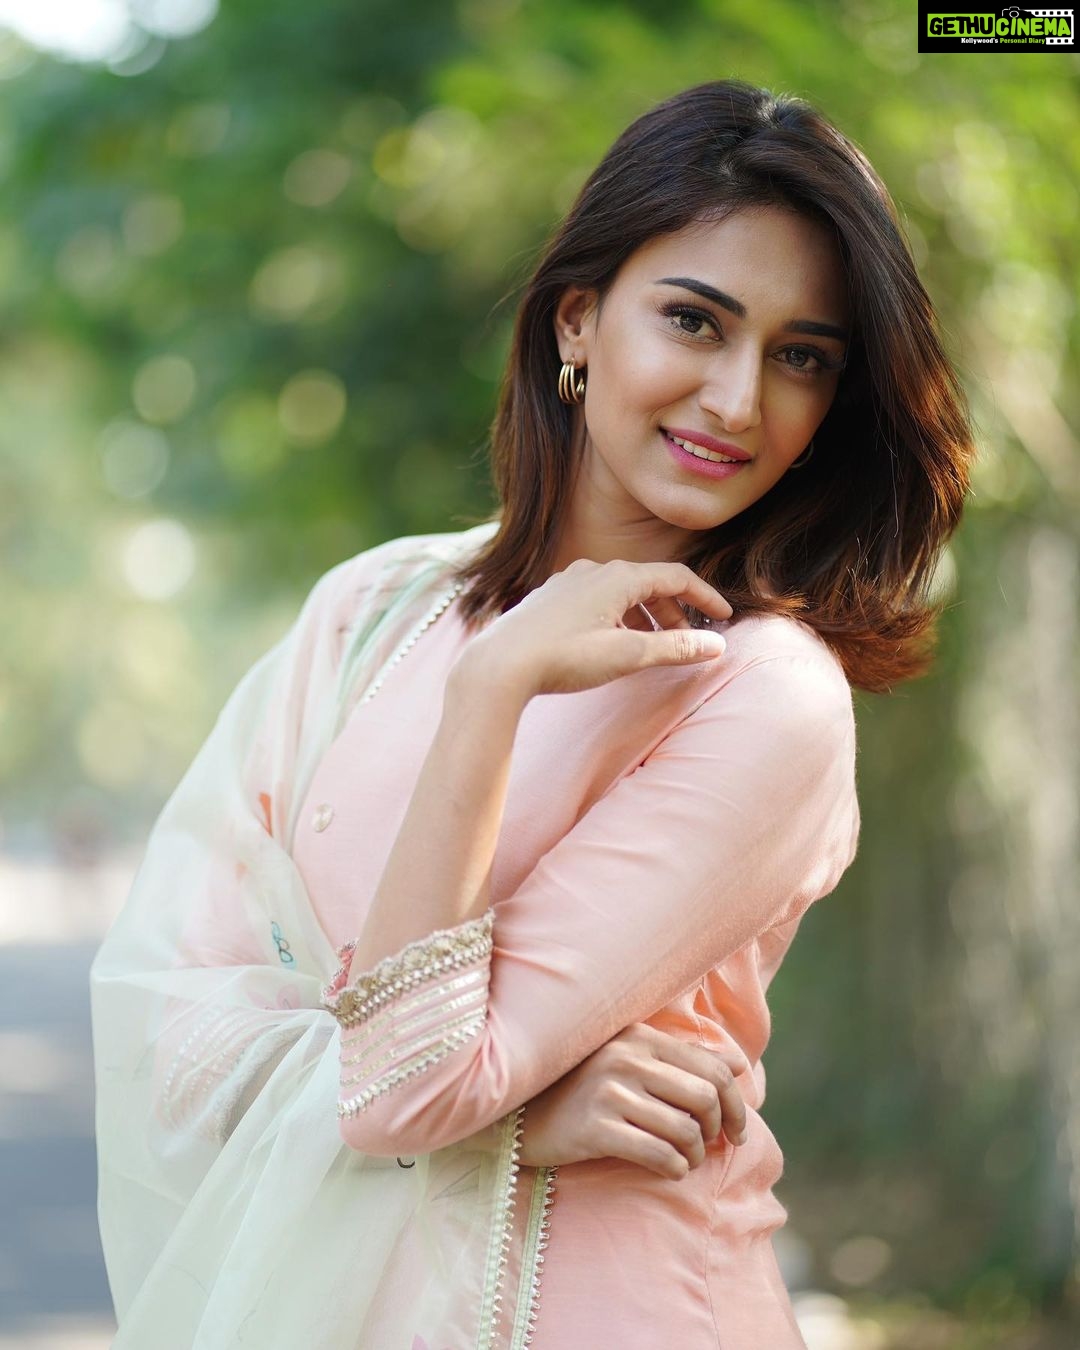 Erica Fernandes - 773.3K Likes - Most Liked Instagram Photos